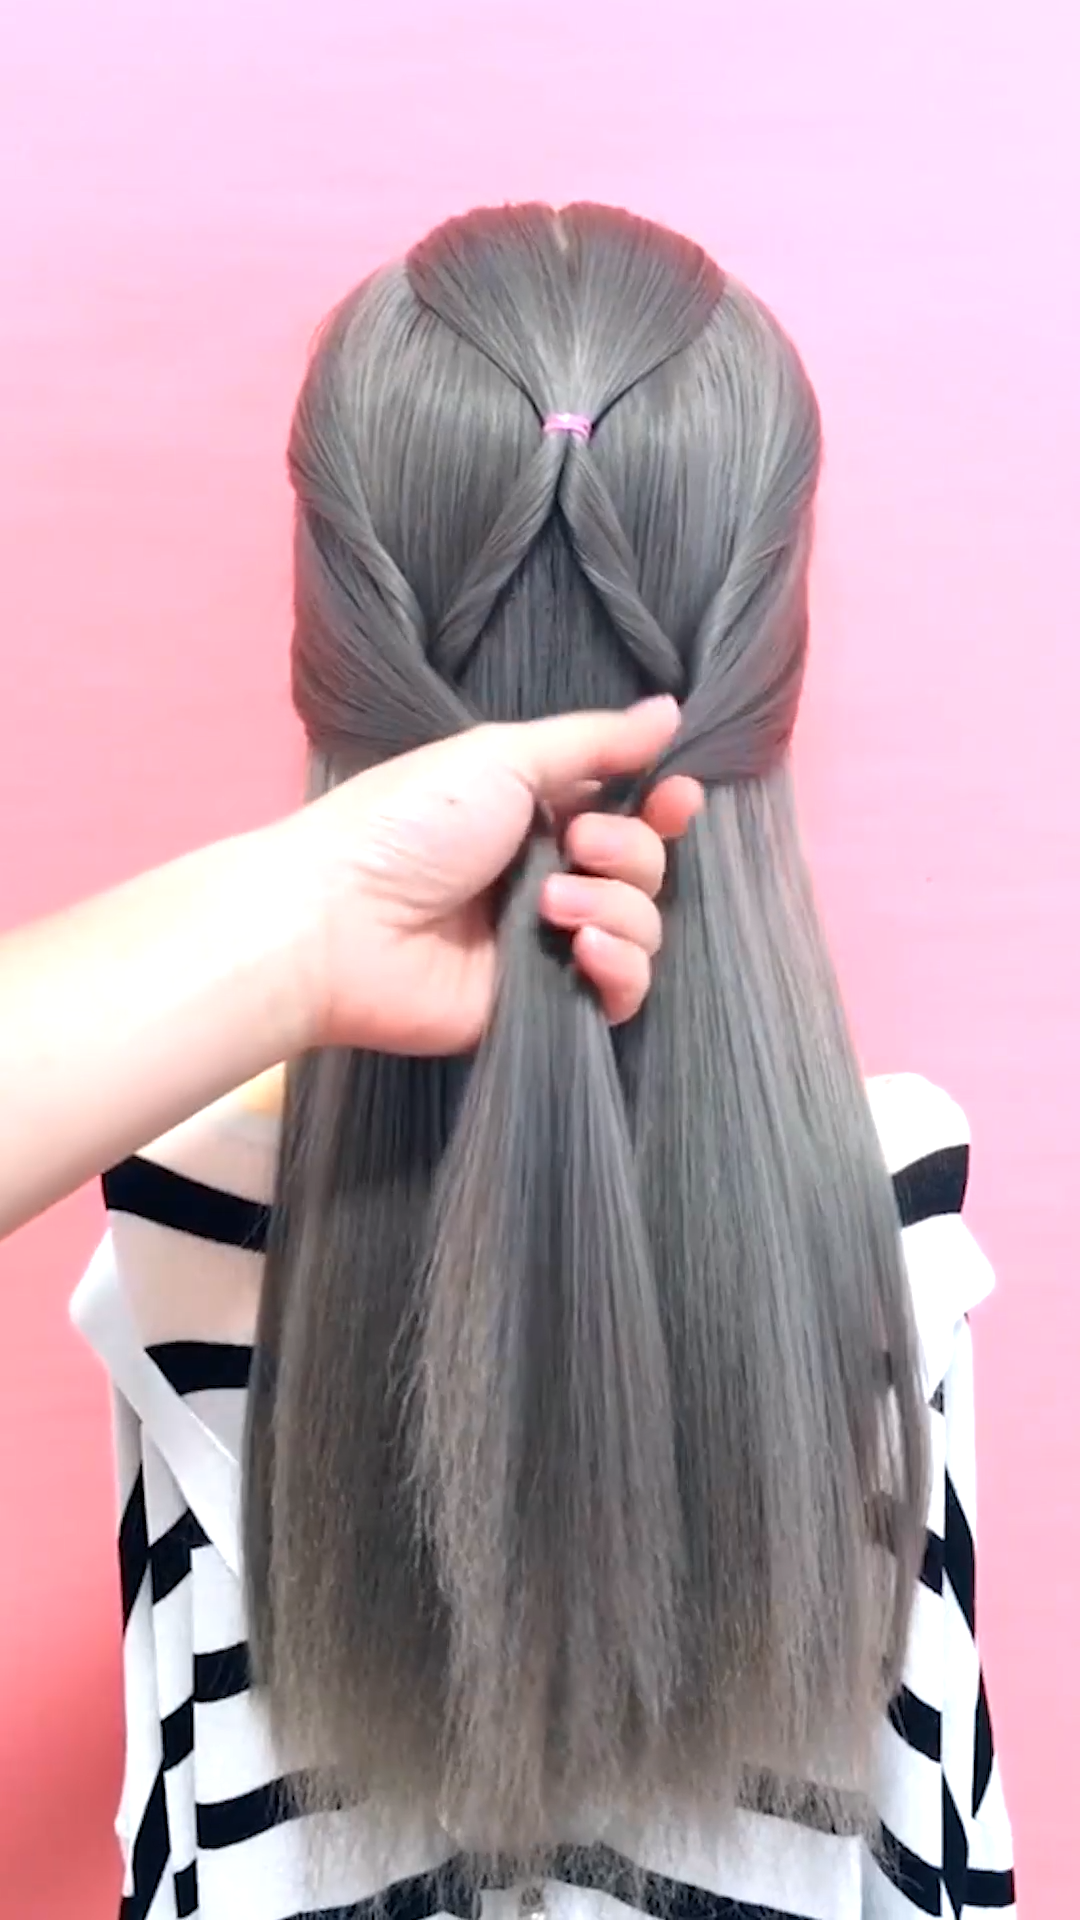 Hairstyle Tutorials For Long Hair | New Hairstyle Videos 2019 | Easy Quick Long Hairstyles PART 3 -   21 hair Videos women ideas